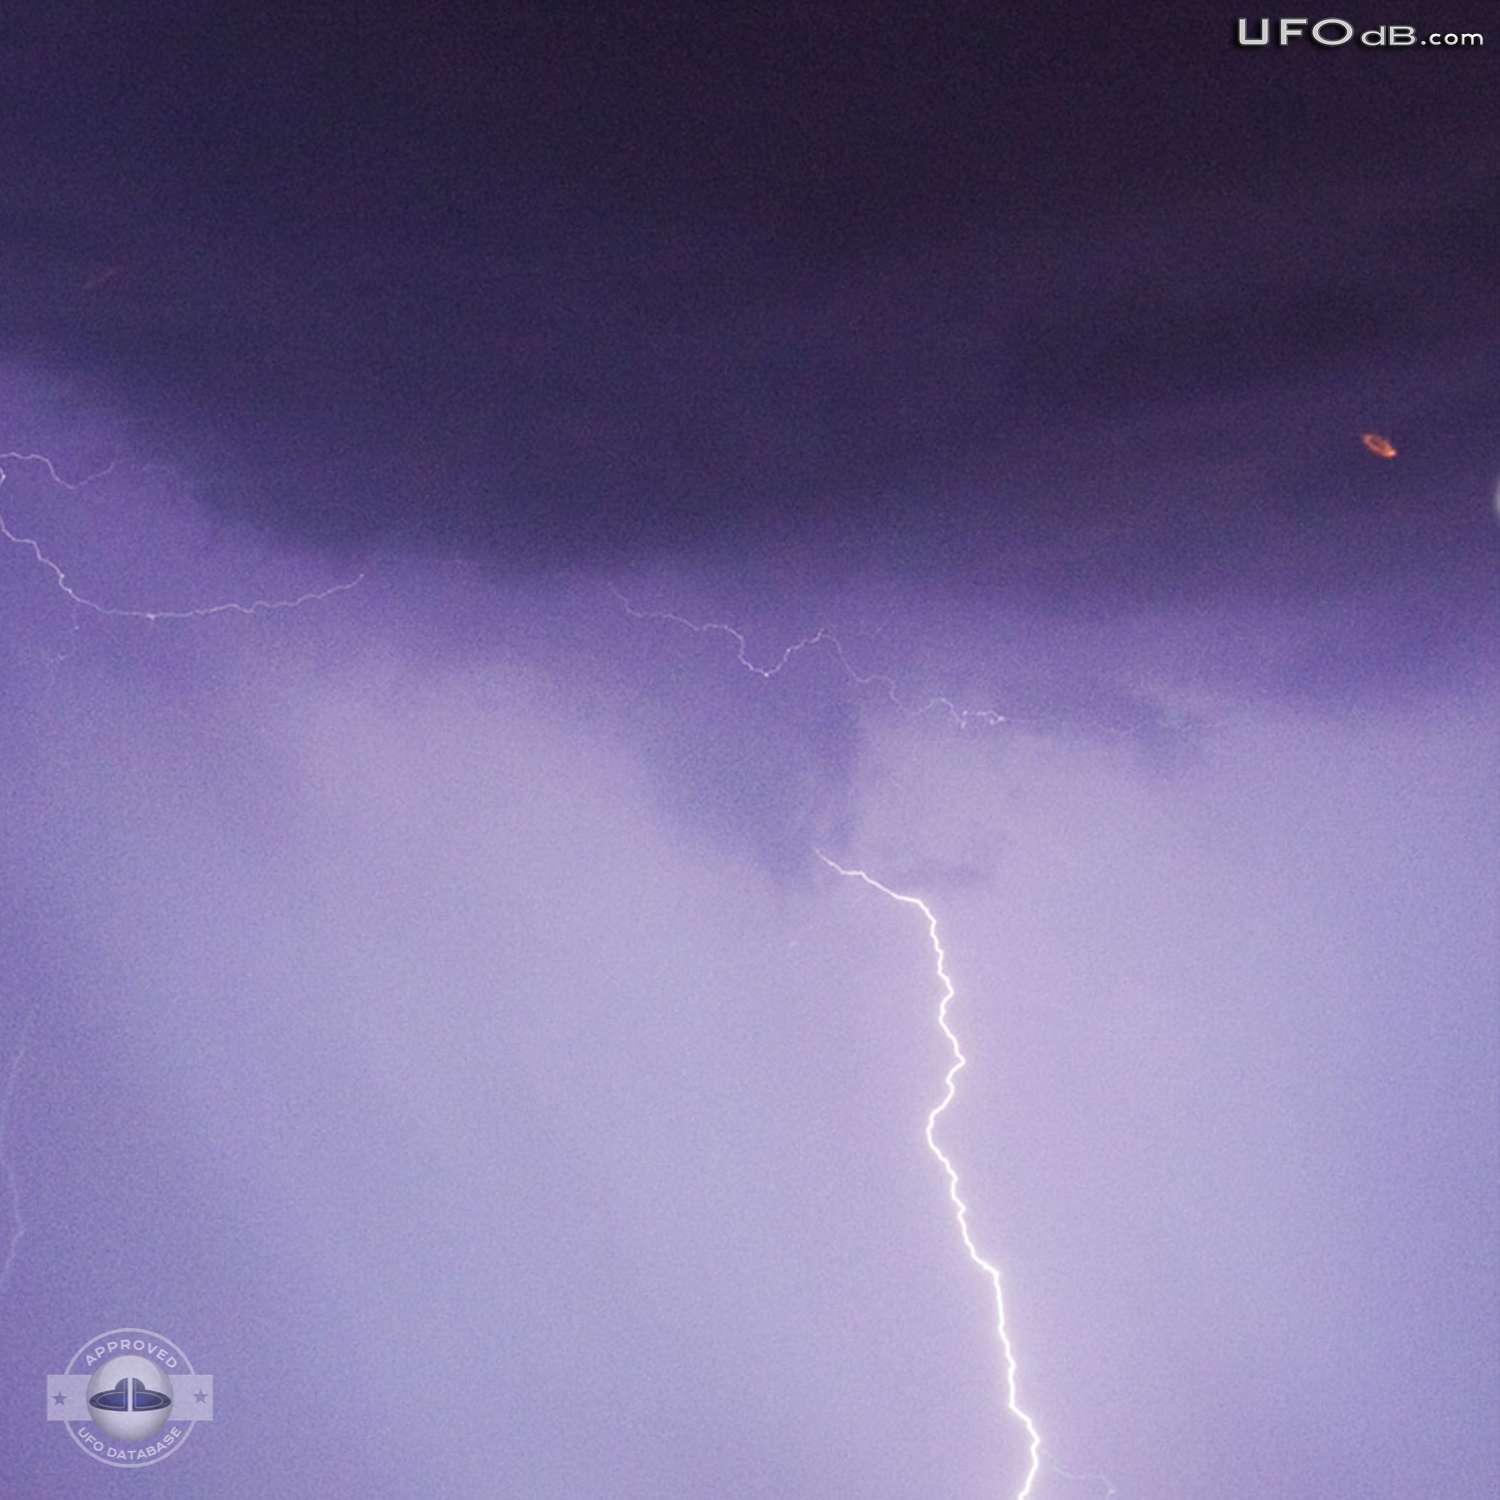 Professional photographer capture UFO near lightnings in Portugal 2010 UFO Picture #345-2